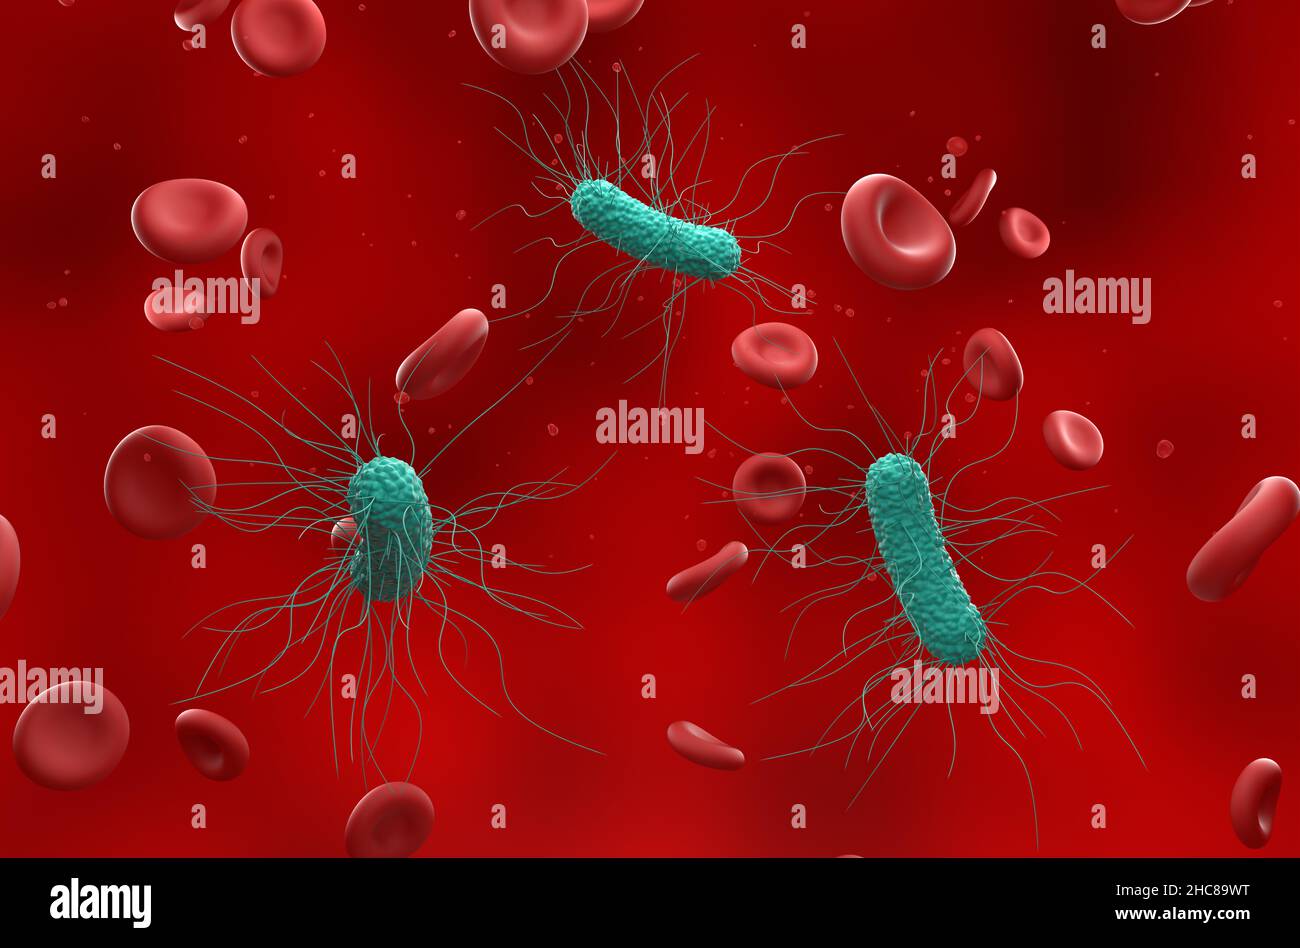 General bacterias in the blood flow - isometric view 3d illustration Stock Photo